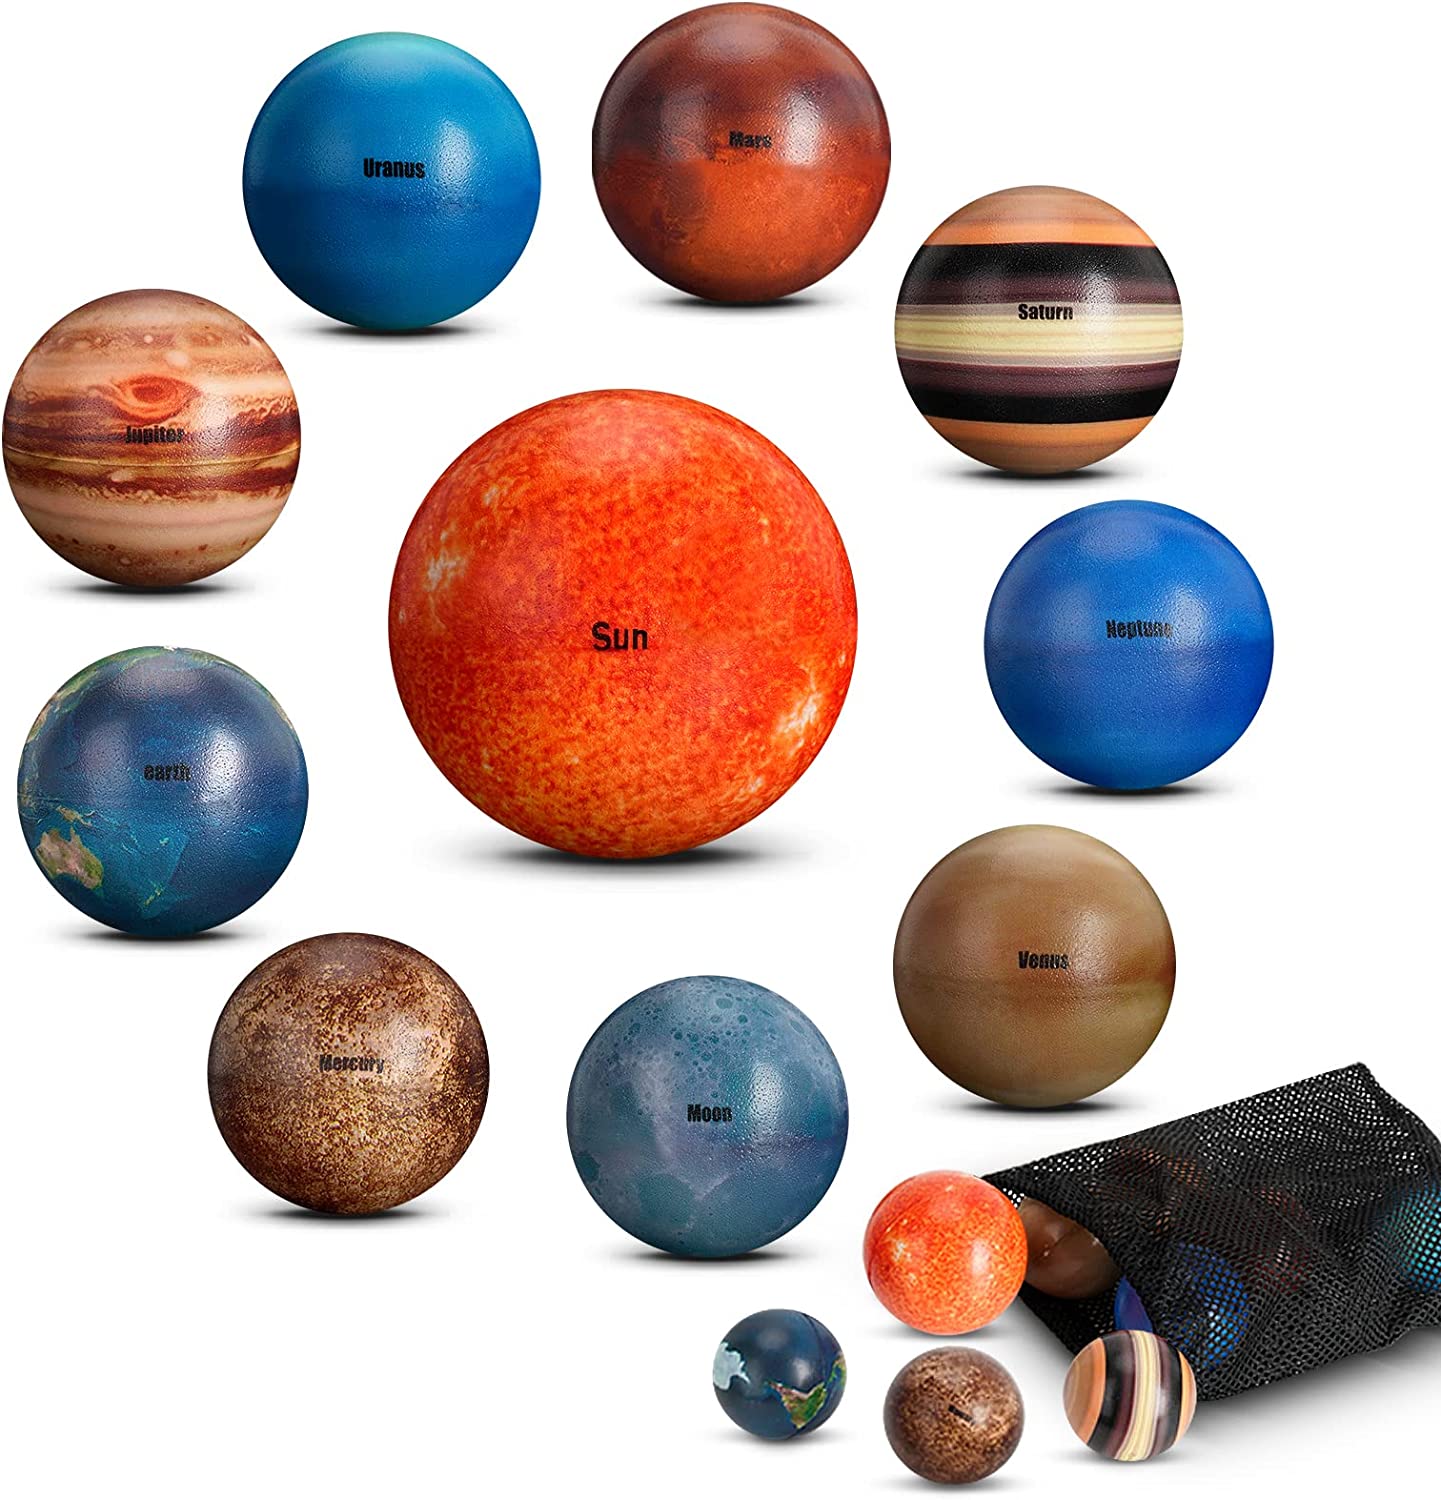 Solar System Planet Balls for Kids Set of 10, Planet Bouncy Balls for Kids Early Learning, Hand Squeeze Sensory Ball Toy, Anti Stress Ball Stress Relief Fidget Toy for Kids, Children Space Themed Gift